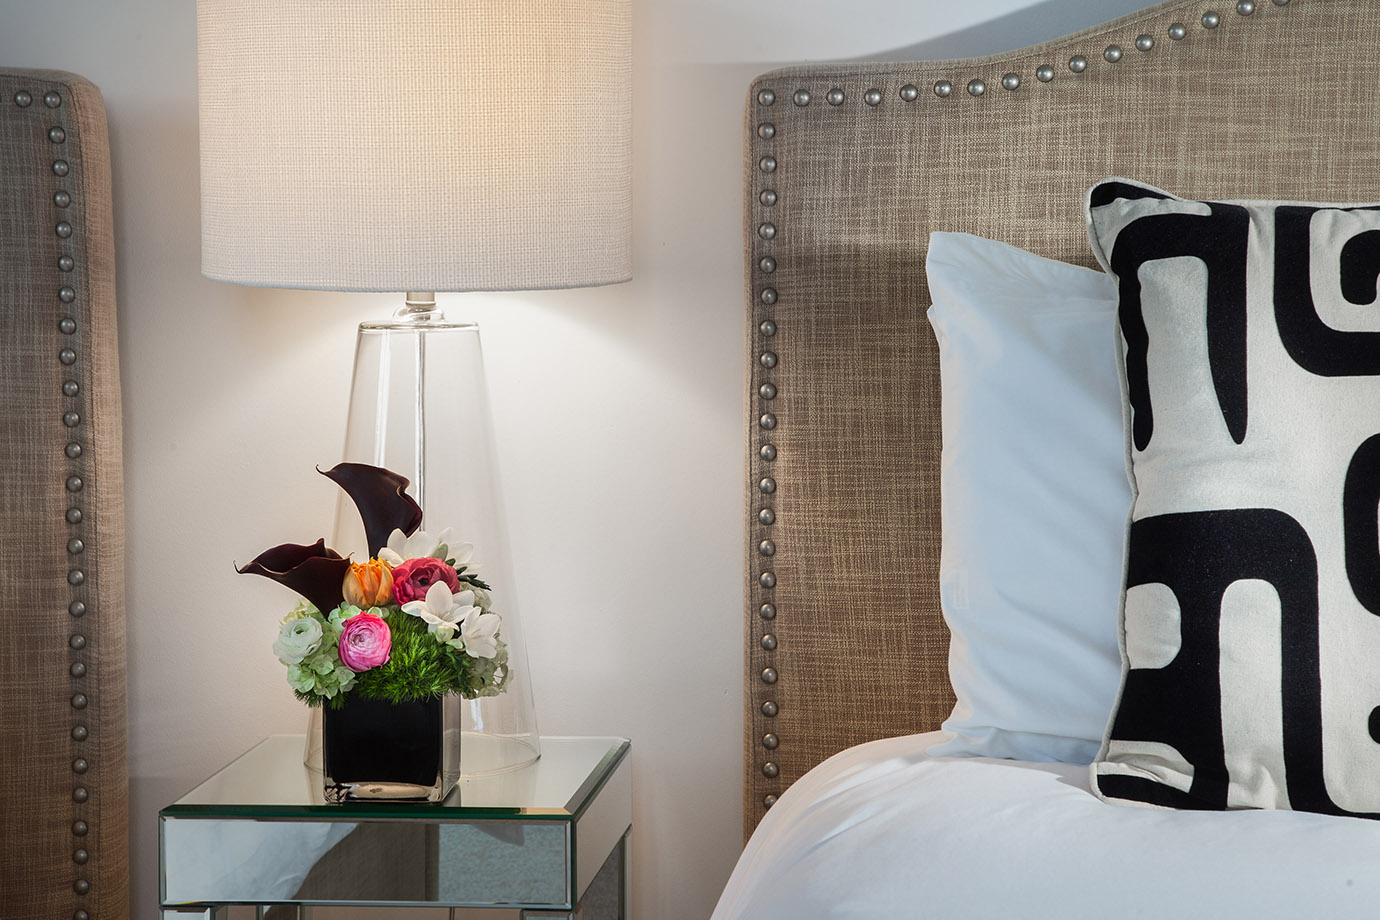 Lamp on Bedside Table behind flowers next to White pillow and a decorative pillow with a black and white pattern in front of a headboard on a bed with white linens at the Sea Oats Estate in Captiva Island, FL